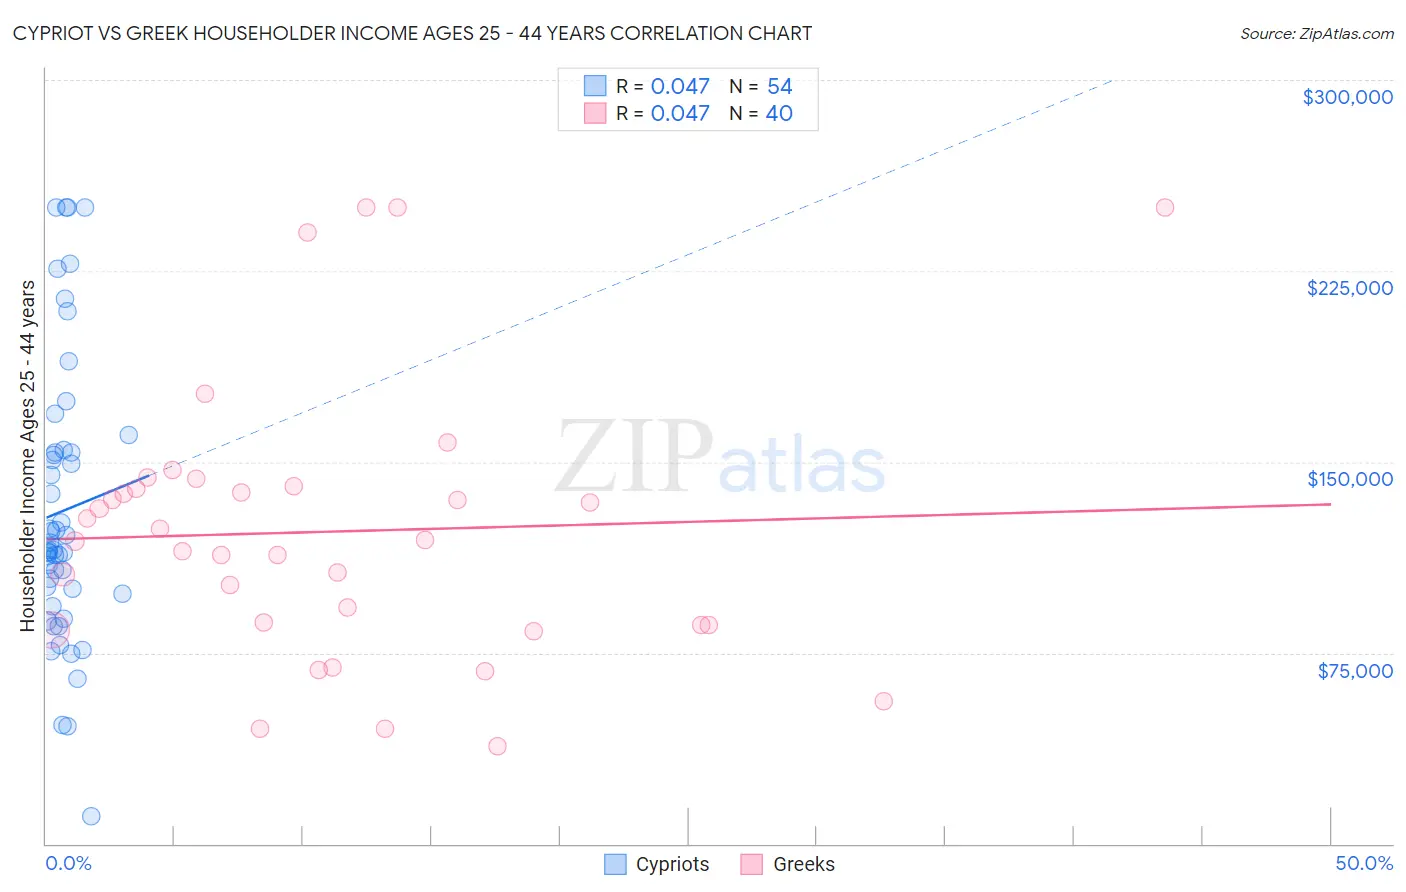 Cypriot vs Greek Householder Income Ages 25 - 44 years